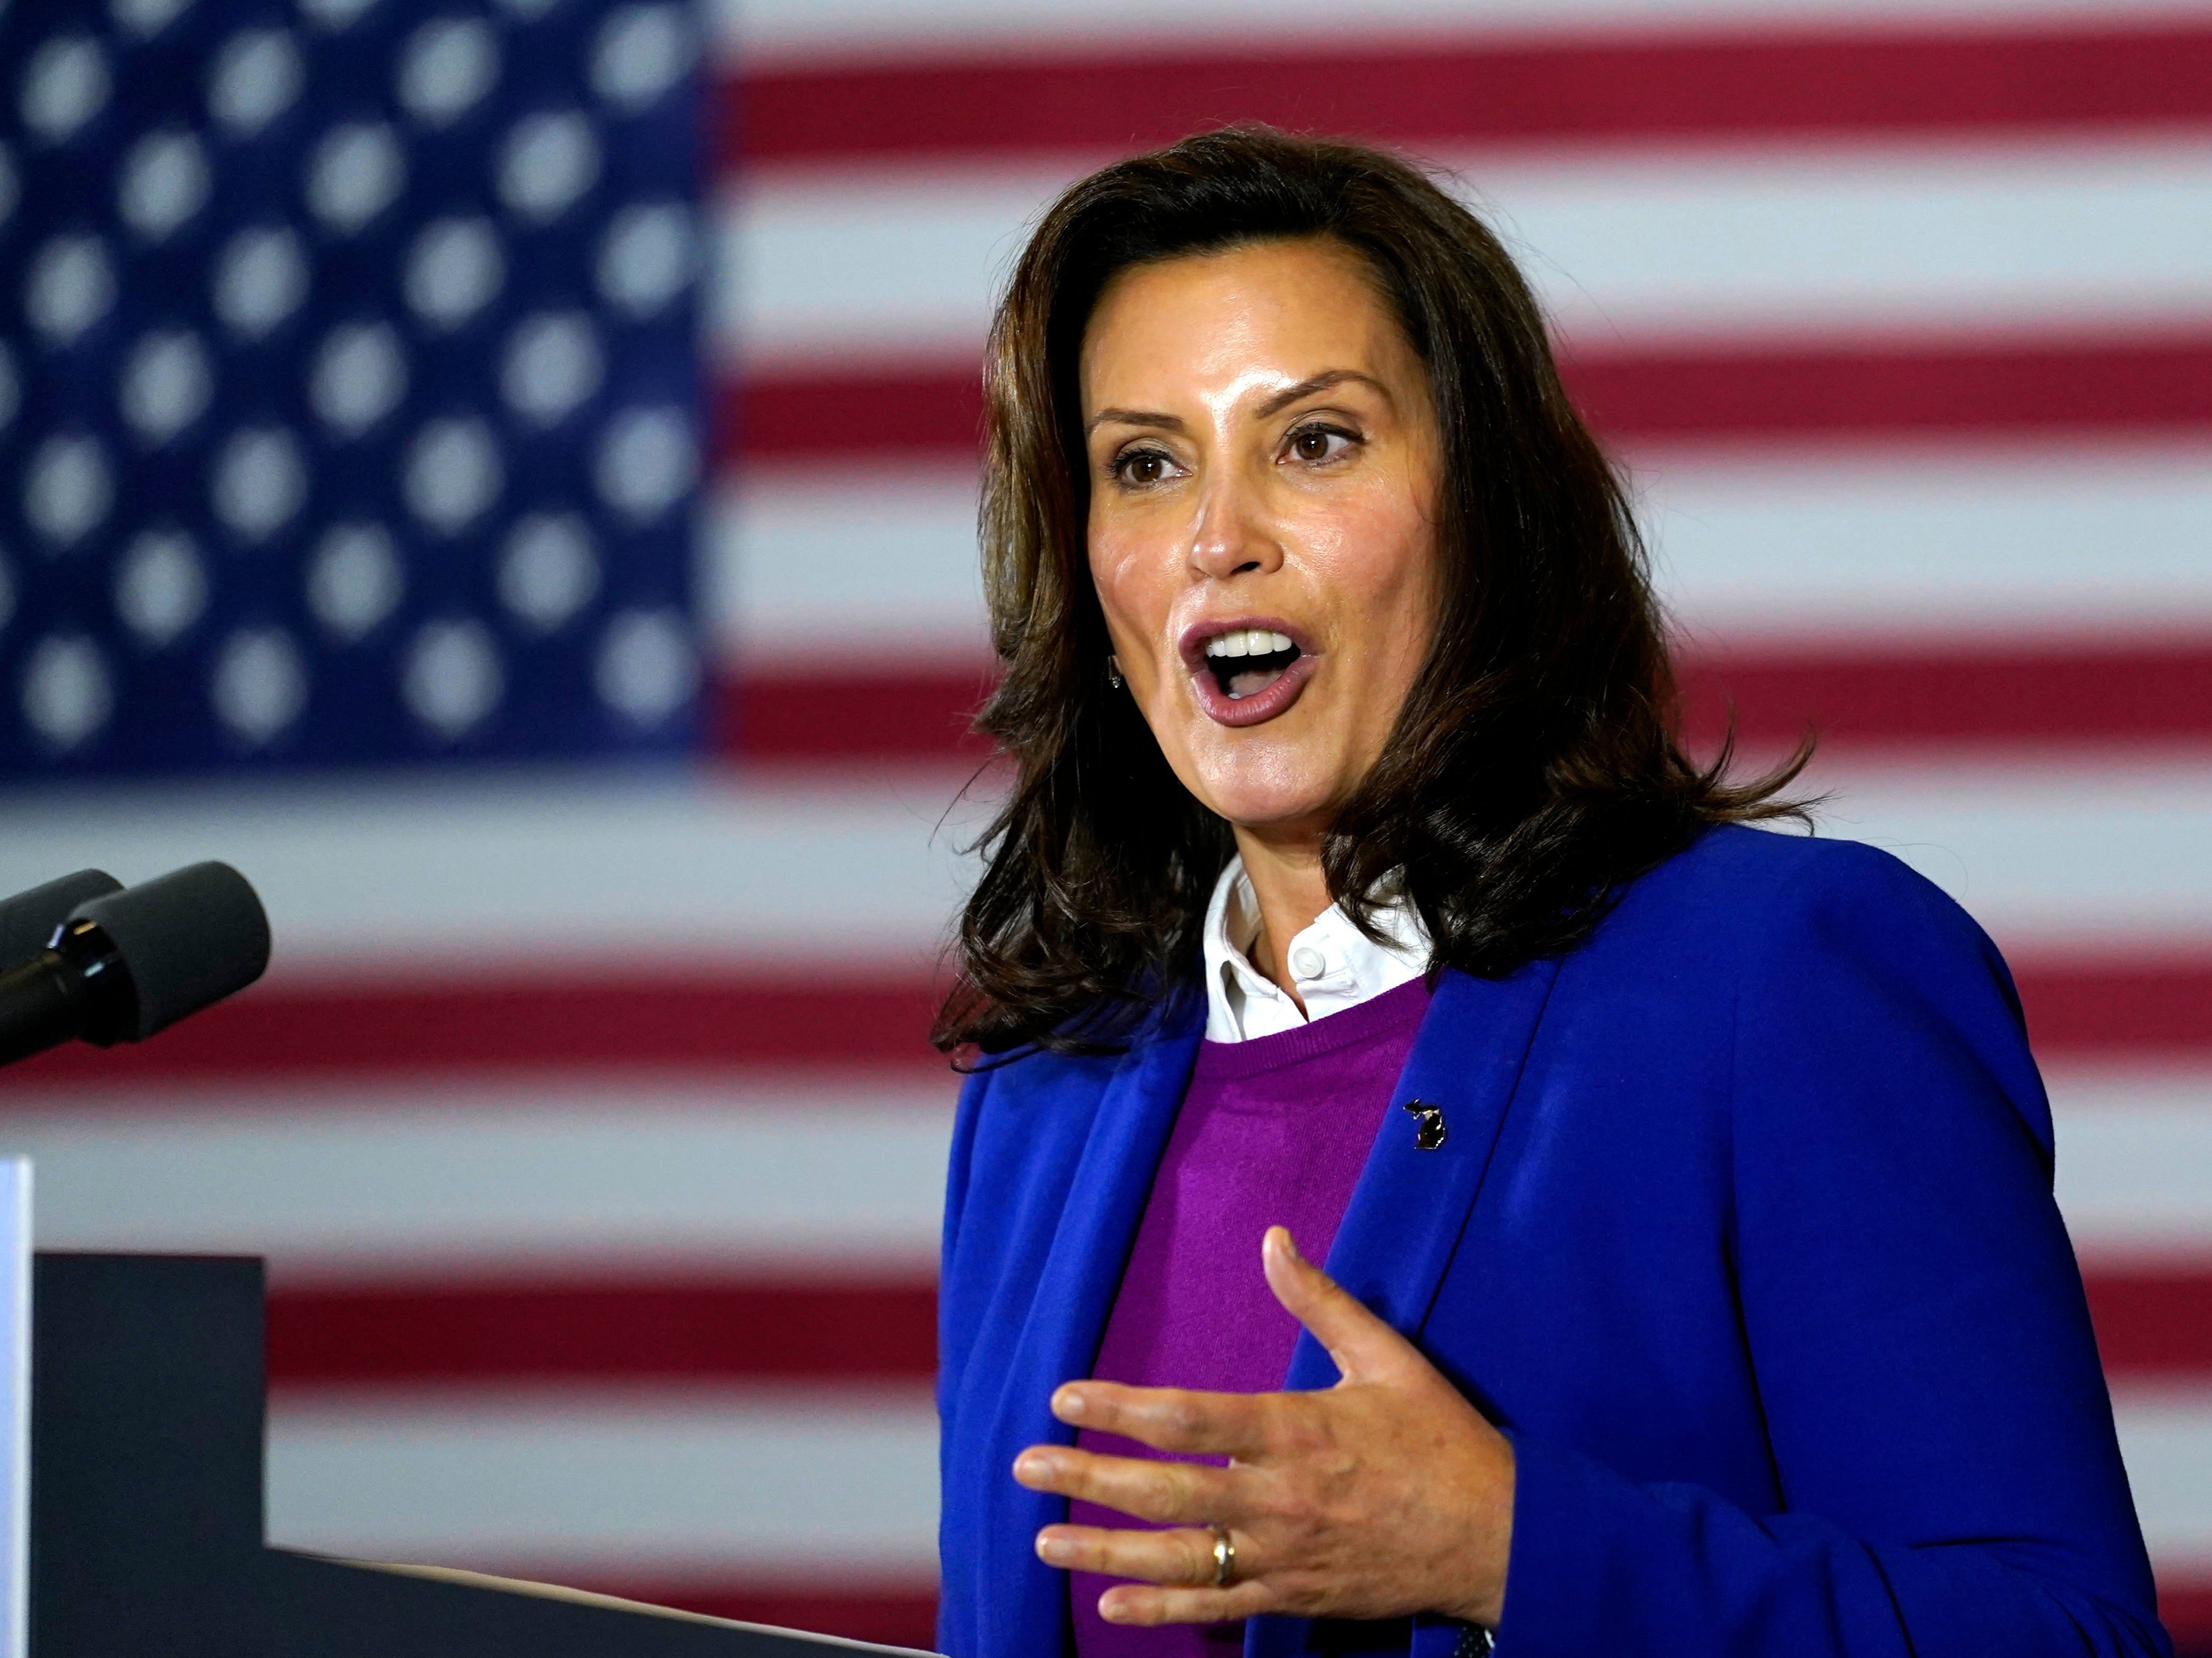 Michigan governor Gretchen Whitmer speaks at Beech Woods Recreation Centre, in Southfield, Michigan, in October 2020, after an alleged kidnap plot was foiled by federal agents.